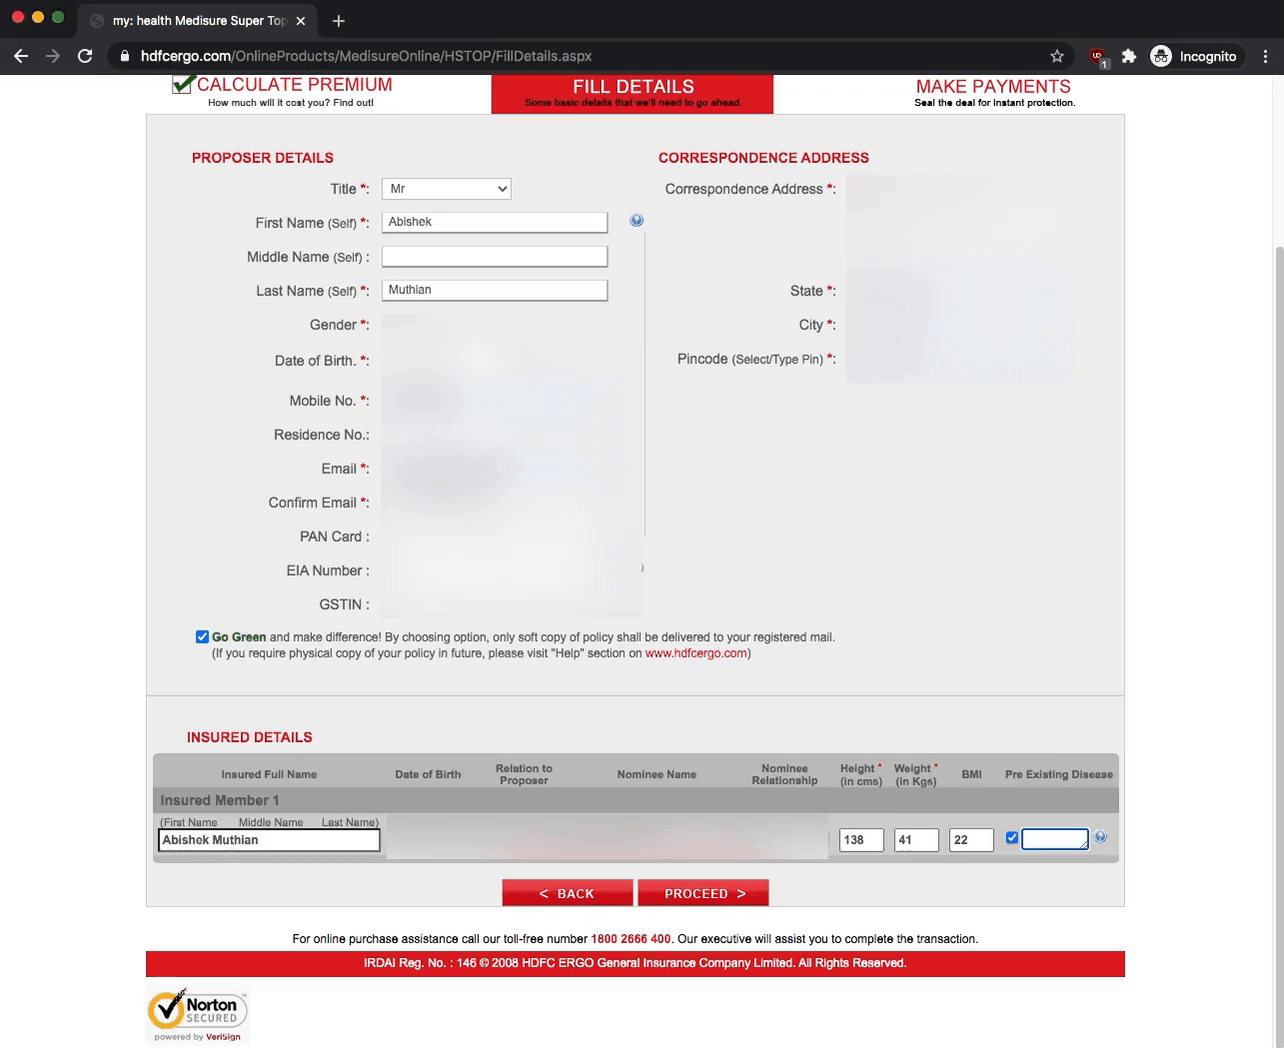 HDFC ERGO filling up the application on their website